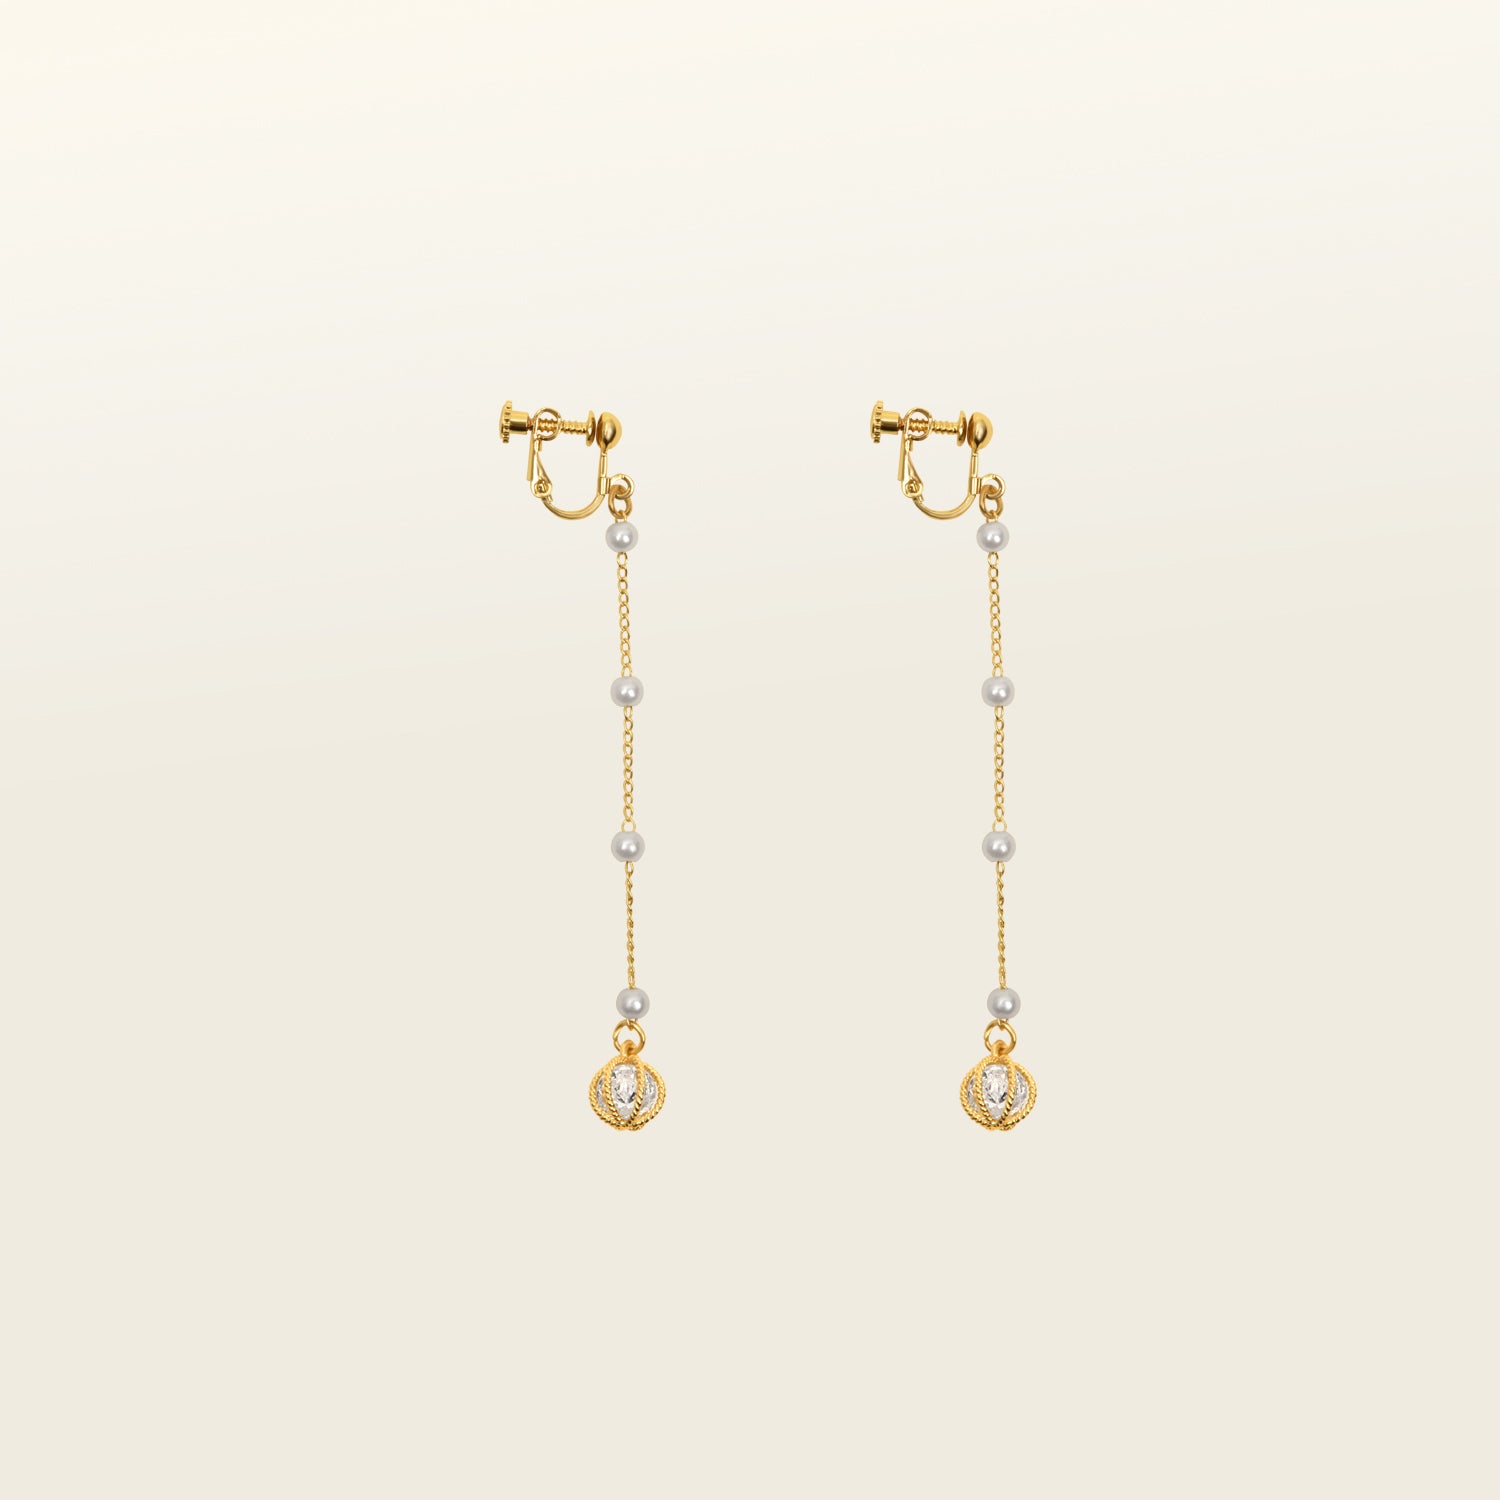 Image of the Pearl Drop Clip-On Earrings features a secure screw-back closure. Compatible with all ear types, these earrings provide a comfortable wear of 8-12 hours and offer an adjustable hold strength. Constructed with gold-tone plated metal alloy and a faux pearl, this single pair of earrings is sure to become a favorite.